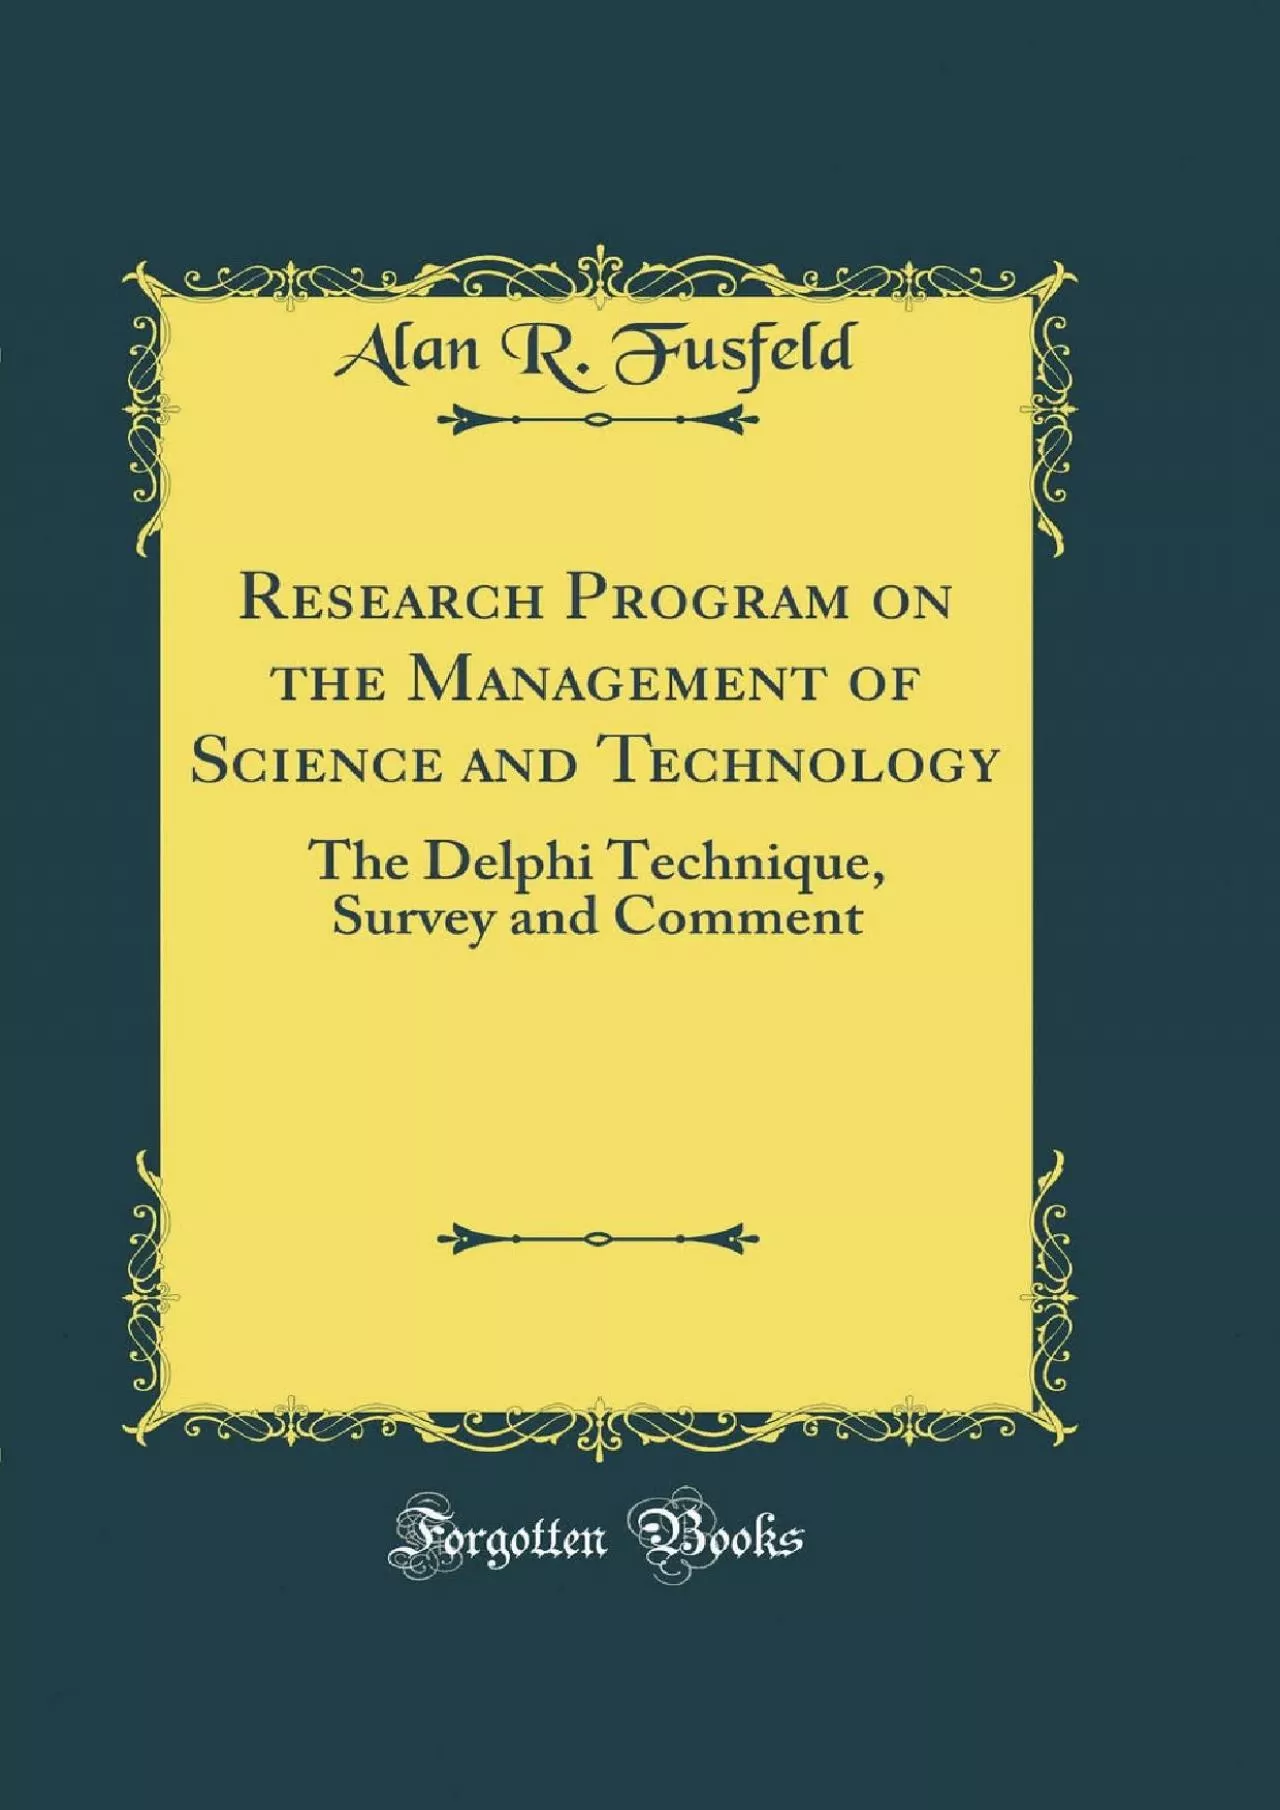 [eBOOK]-Research Program on the Management of Science and Technology: The Delphi Technique,